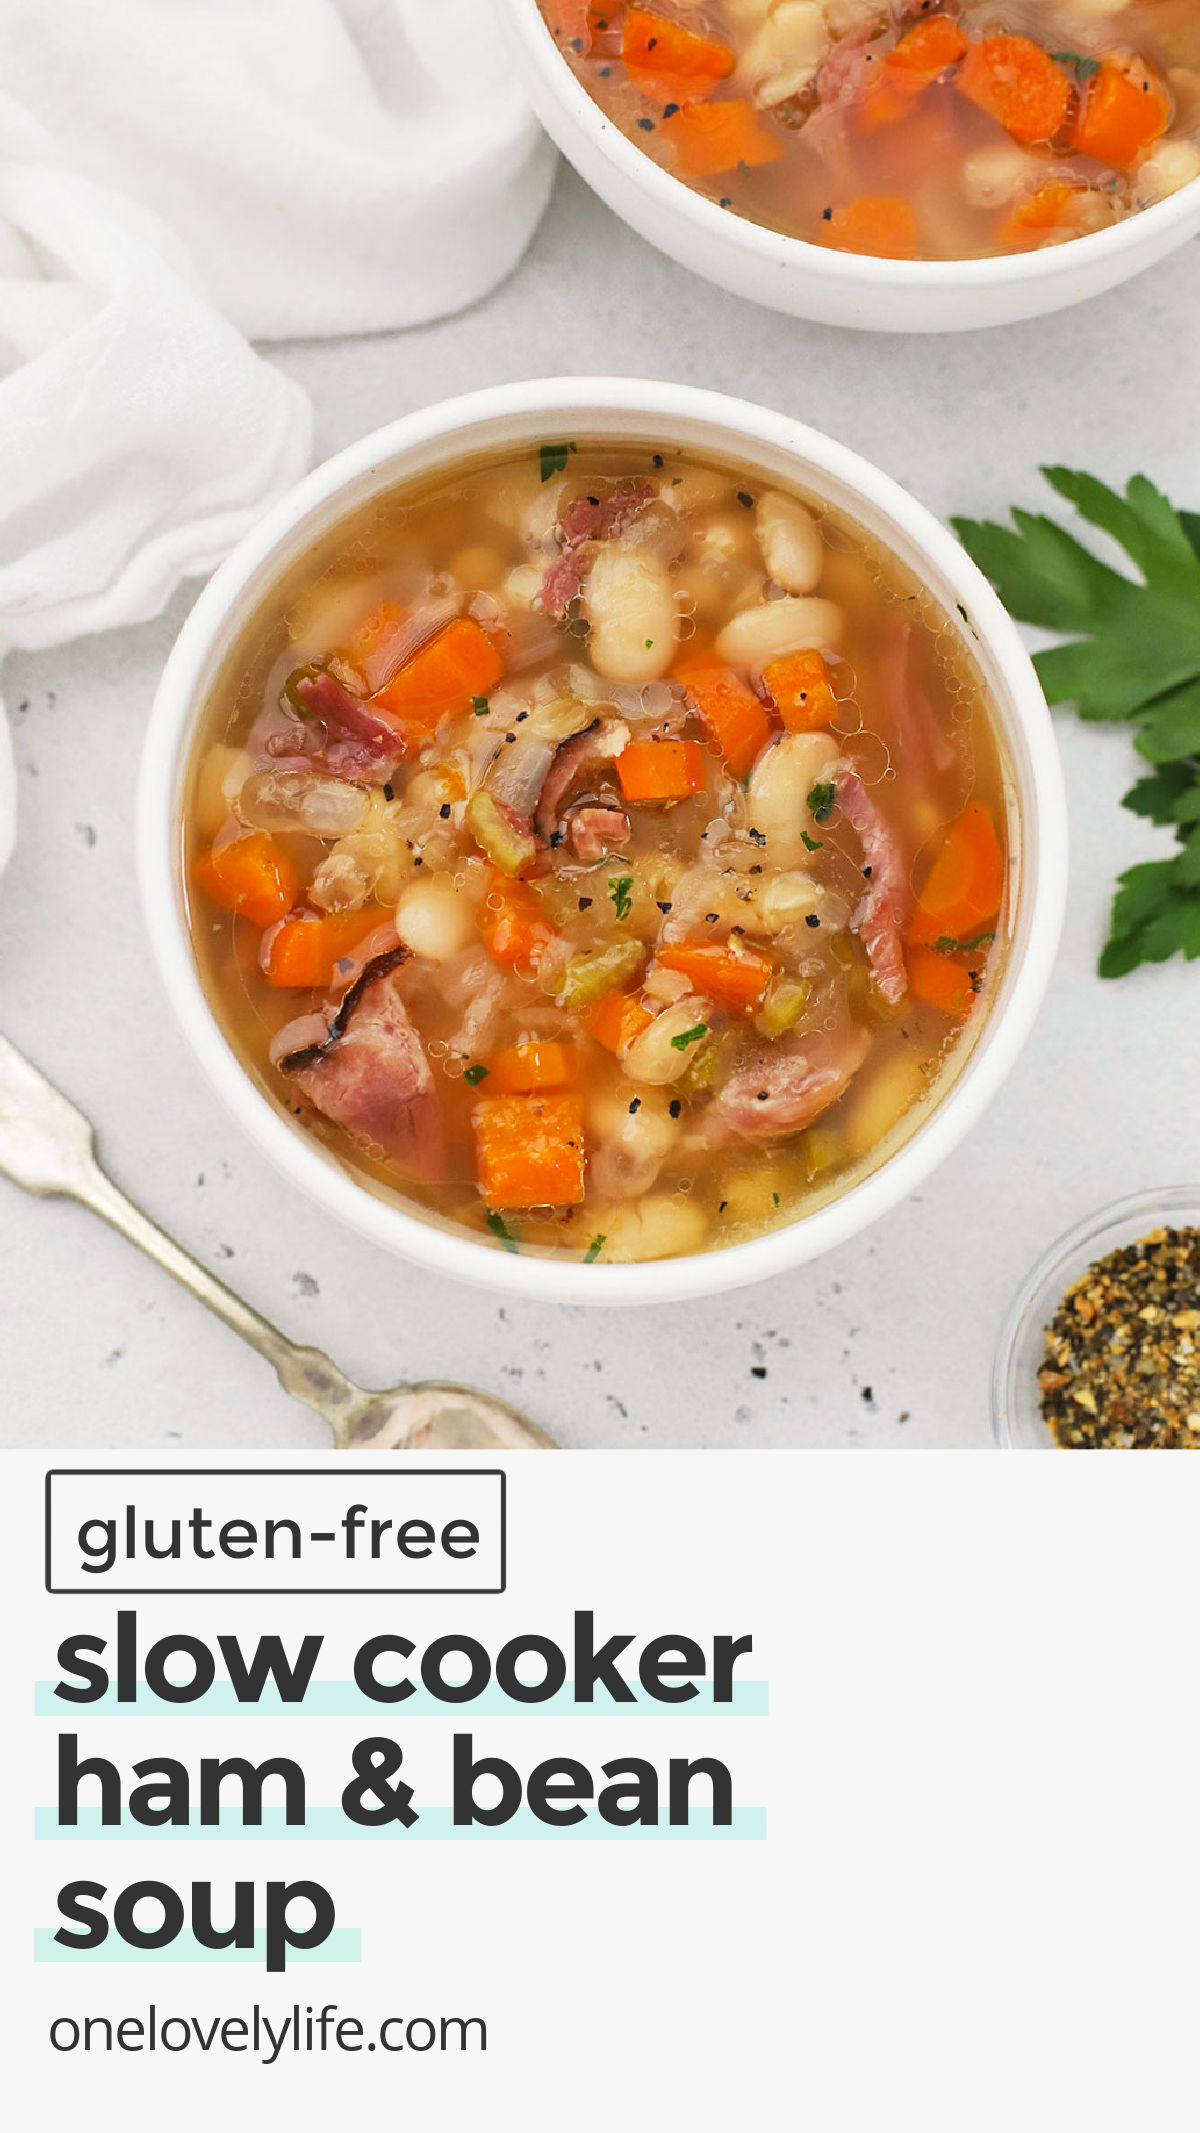 Slow Cooker Ham And Bean Soup - This Cozy Clay Pot Ham Bean Soup Is the Perfect way to use leftover ham from the holidays! You